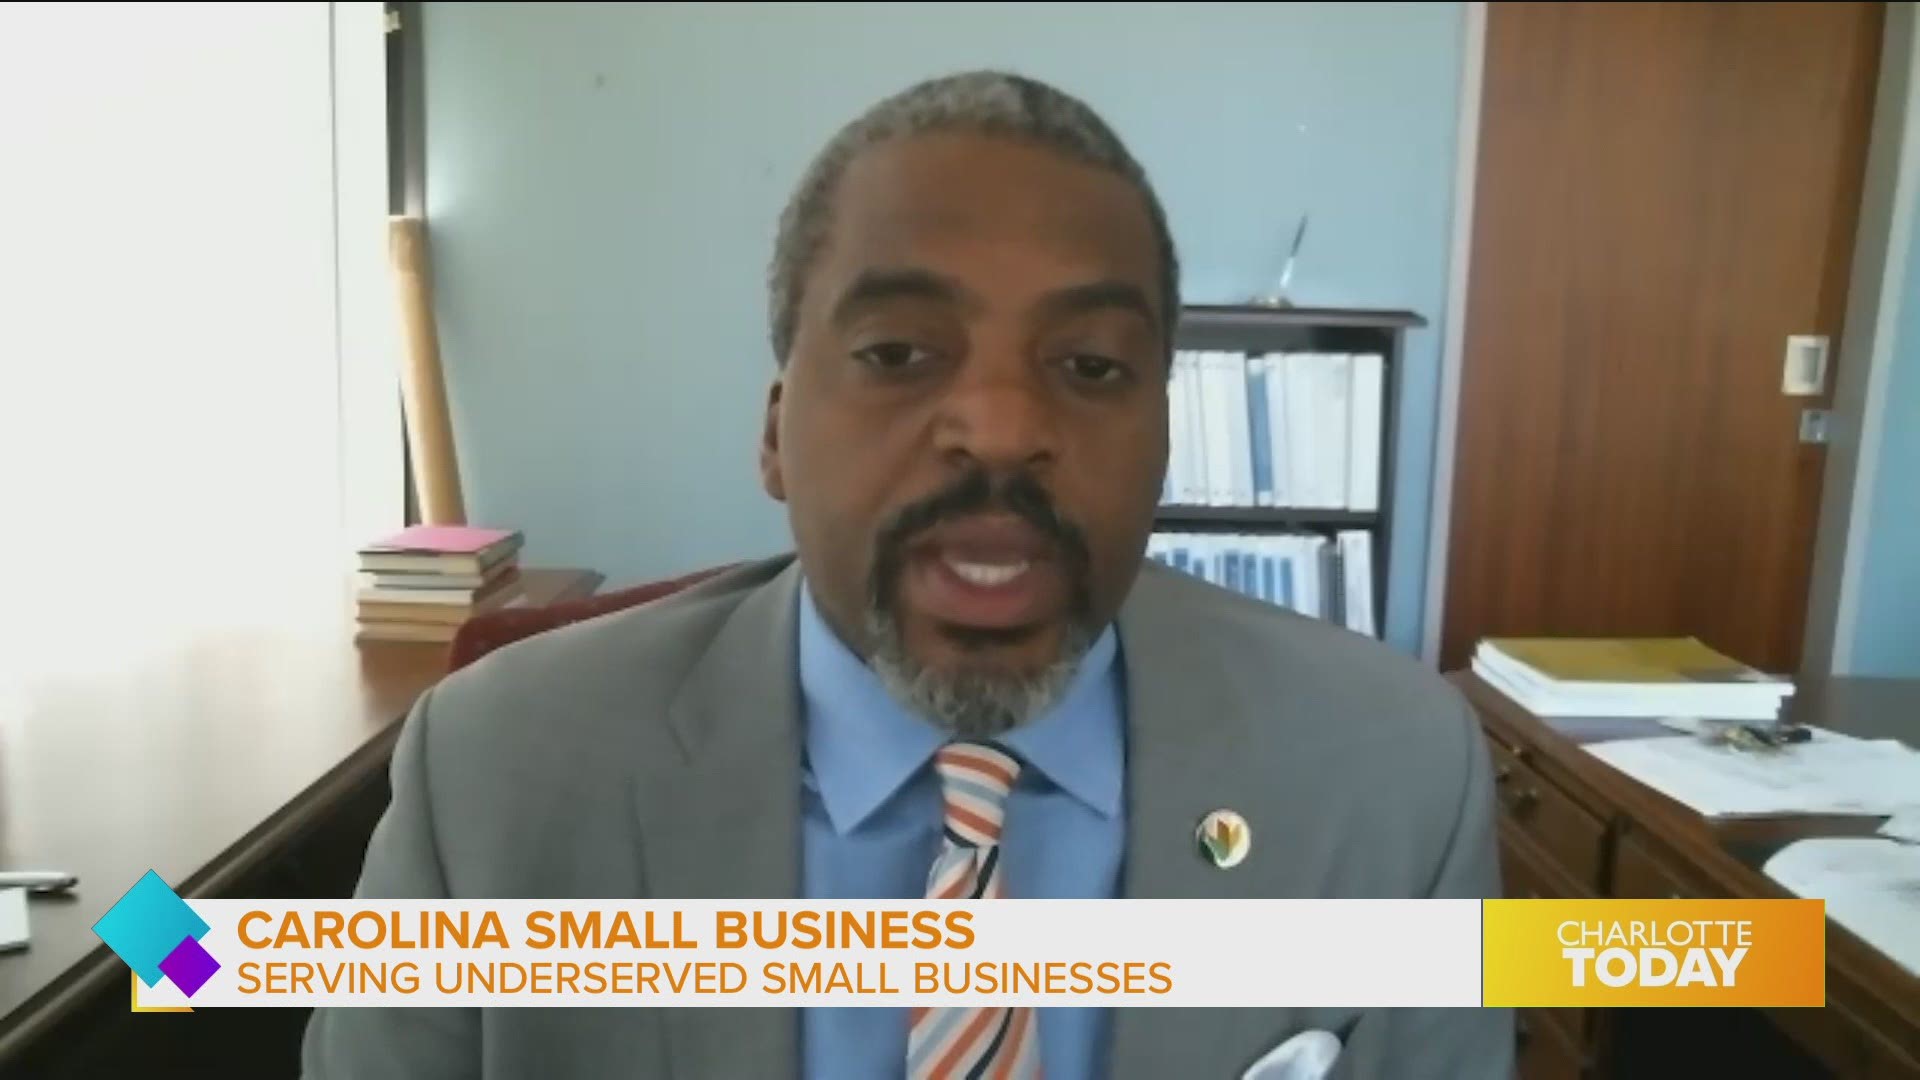 Carolina Small Business offers financial and strategic guidance